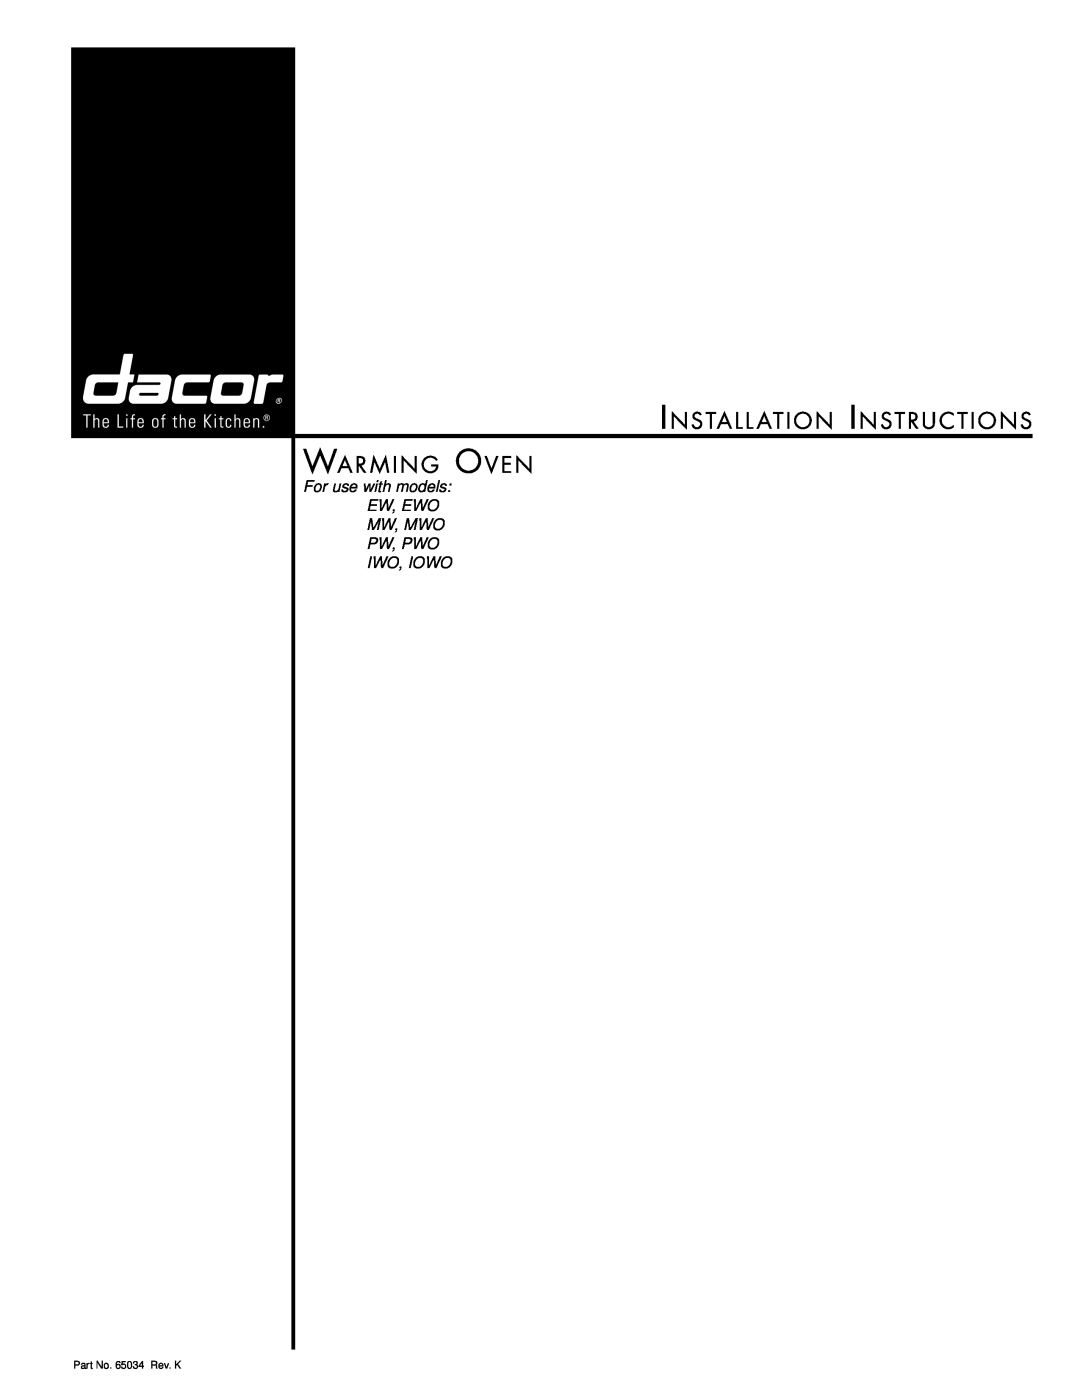 Dacor IWO, IOWO, PWO installation instructions Install ation Instructions Warming Oven, Part No. 65034 Rev. K 